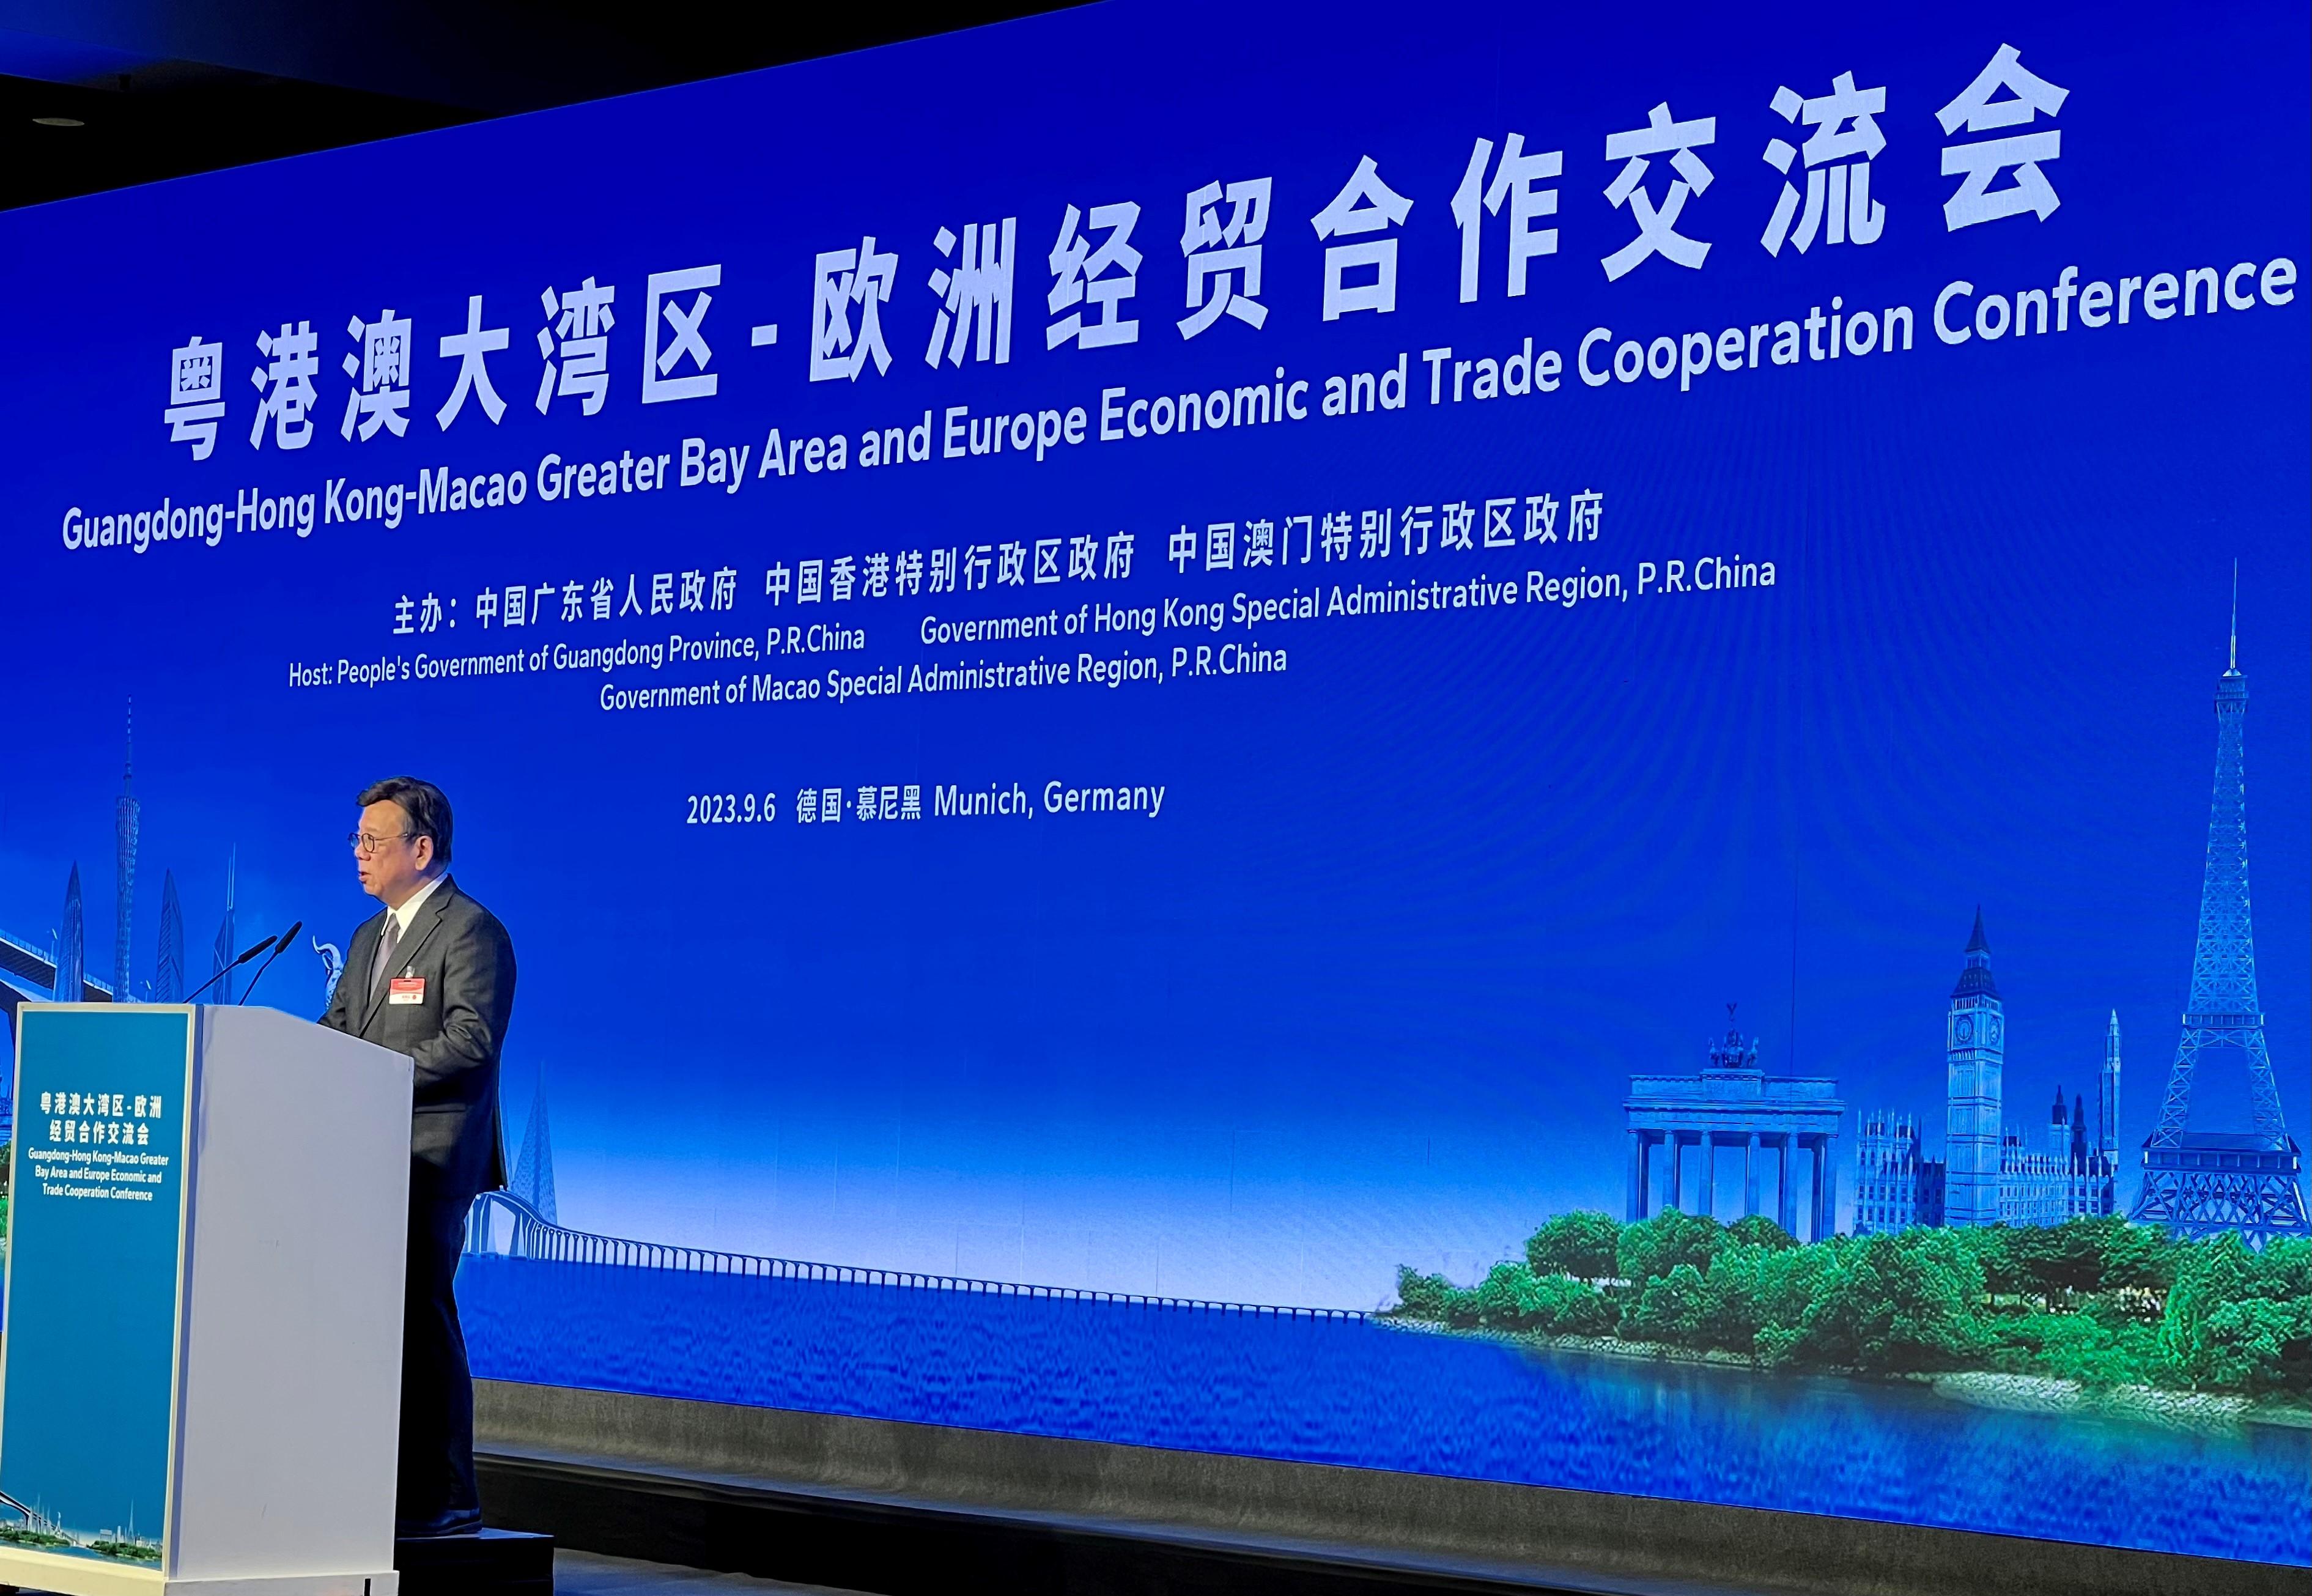 The Secretary for Commerce and Economic Development, Mr Algernon Yau, attended the Guangdong-Hong Kong-Macao Greater Bay Area and Europe Economic and Trade Cooperation Conference in Munich, Germany, on September 6 (Munich time). Photo shows Mr Yau delivering a speech at the conference.